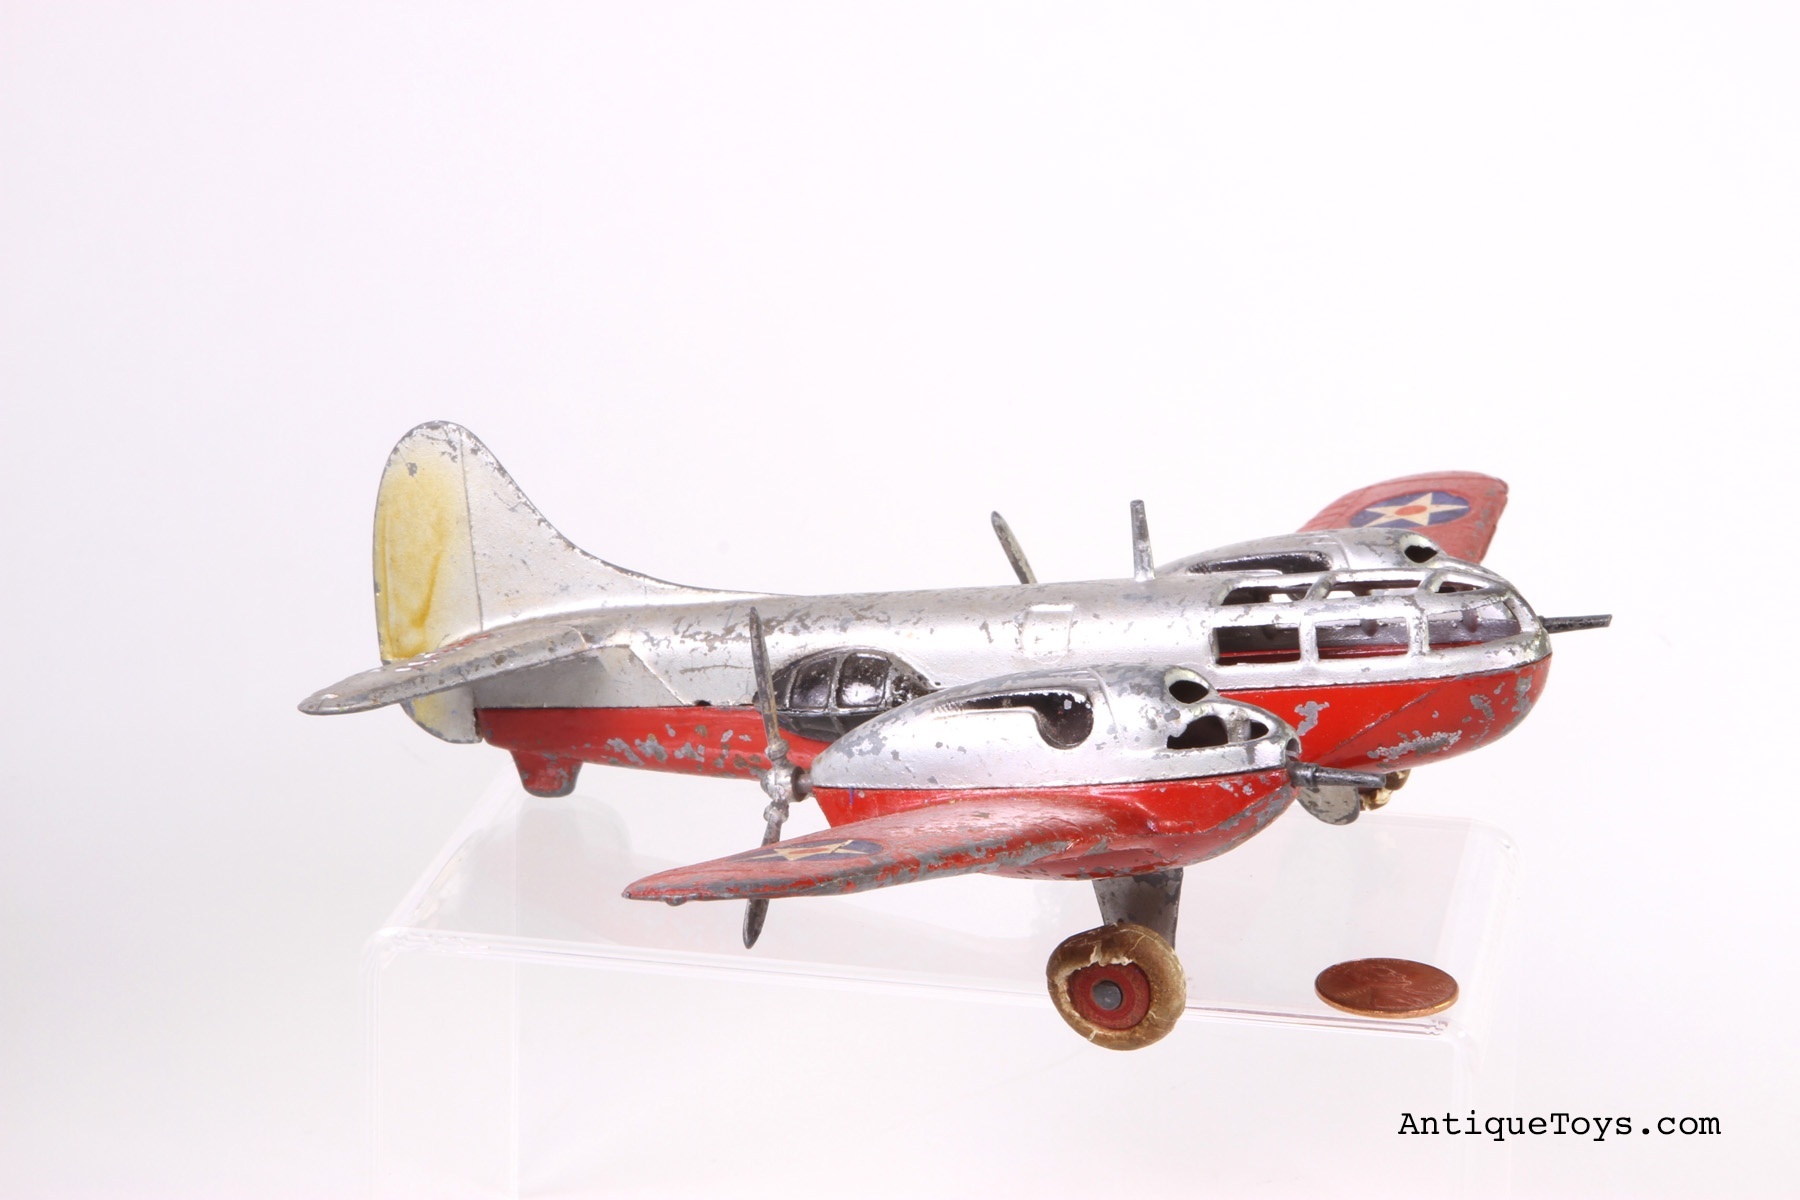 Hubley Aircuda Airplane that was also a cast iron toy. This bomber design shows off Hubley toy’s expert casting and detail.